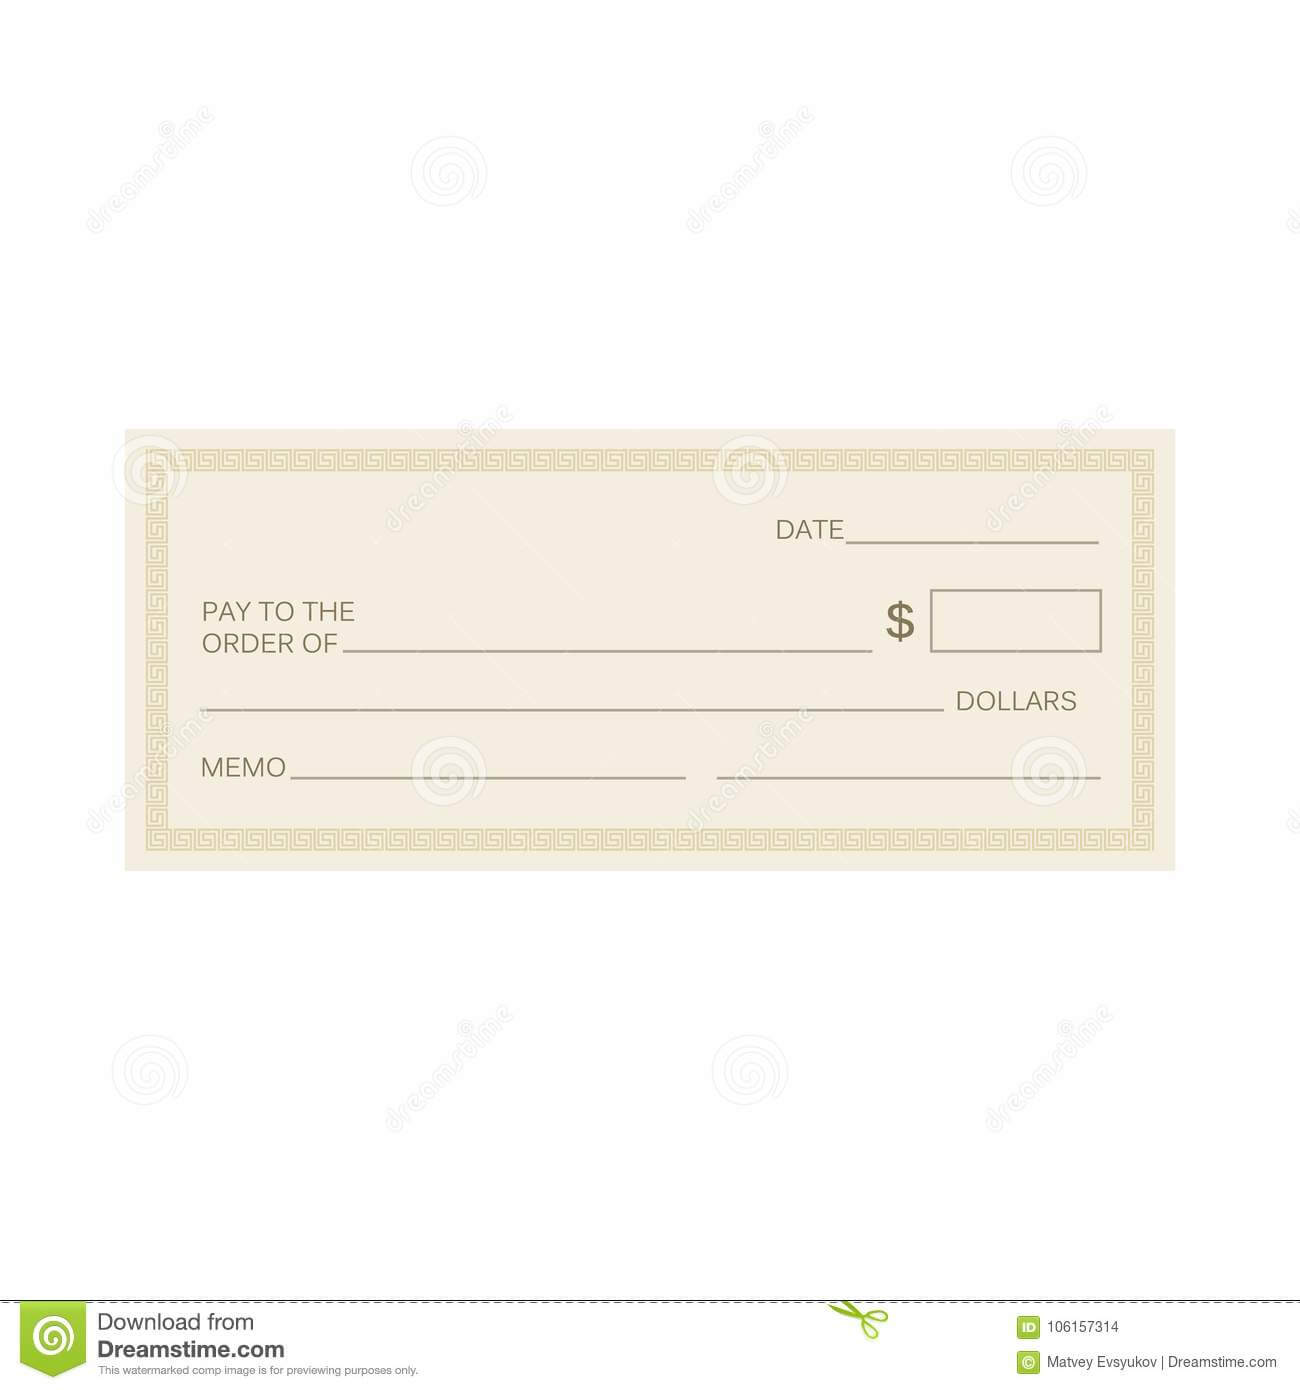 Blank Check Template. Check Template. Banking Check Templ Throughout Blank Business Check Template